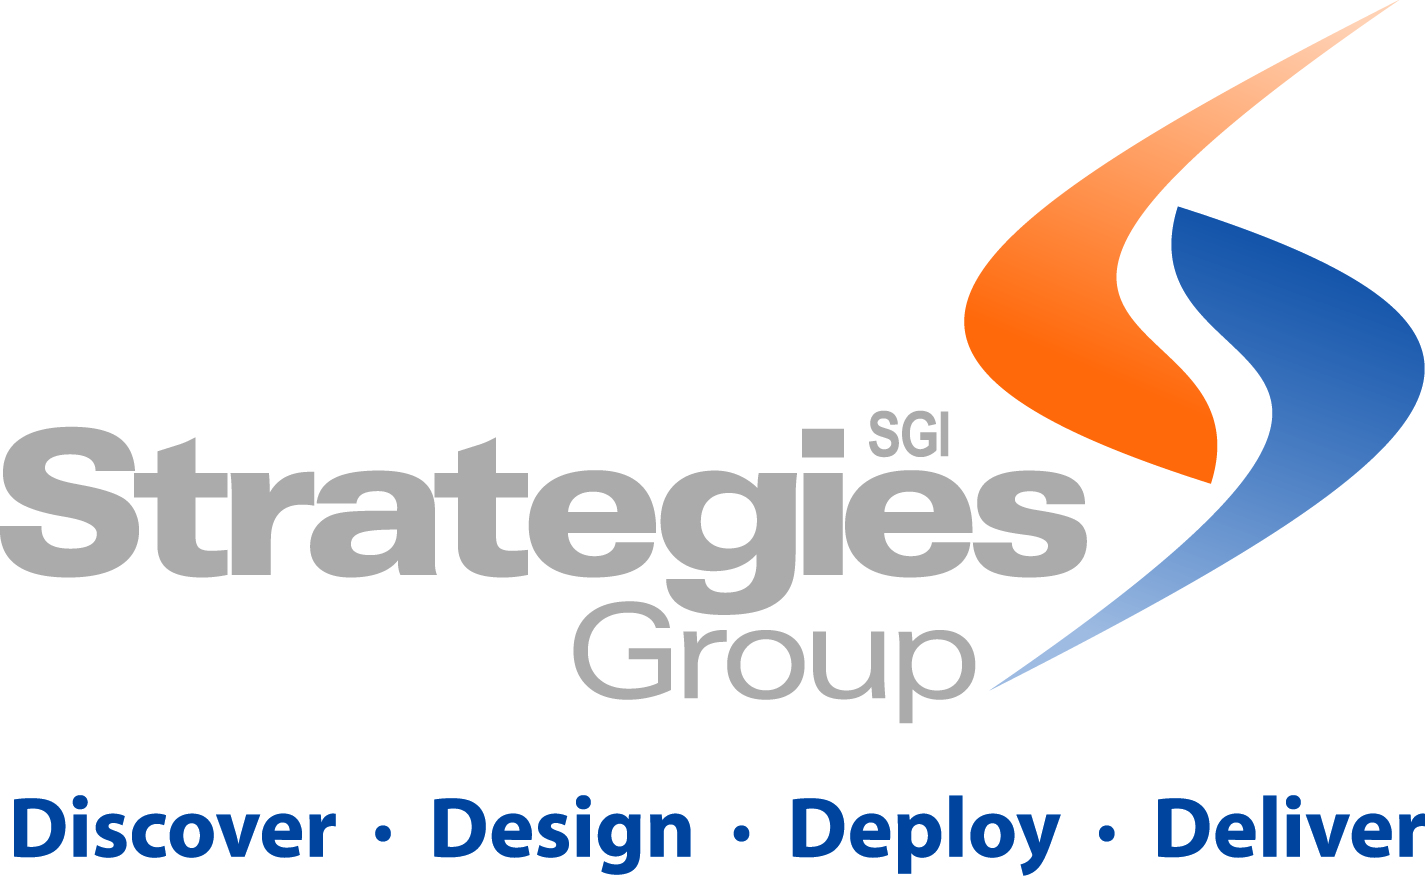 Strategies Group, Inc. is a leading software consulting firm in the construction industry.